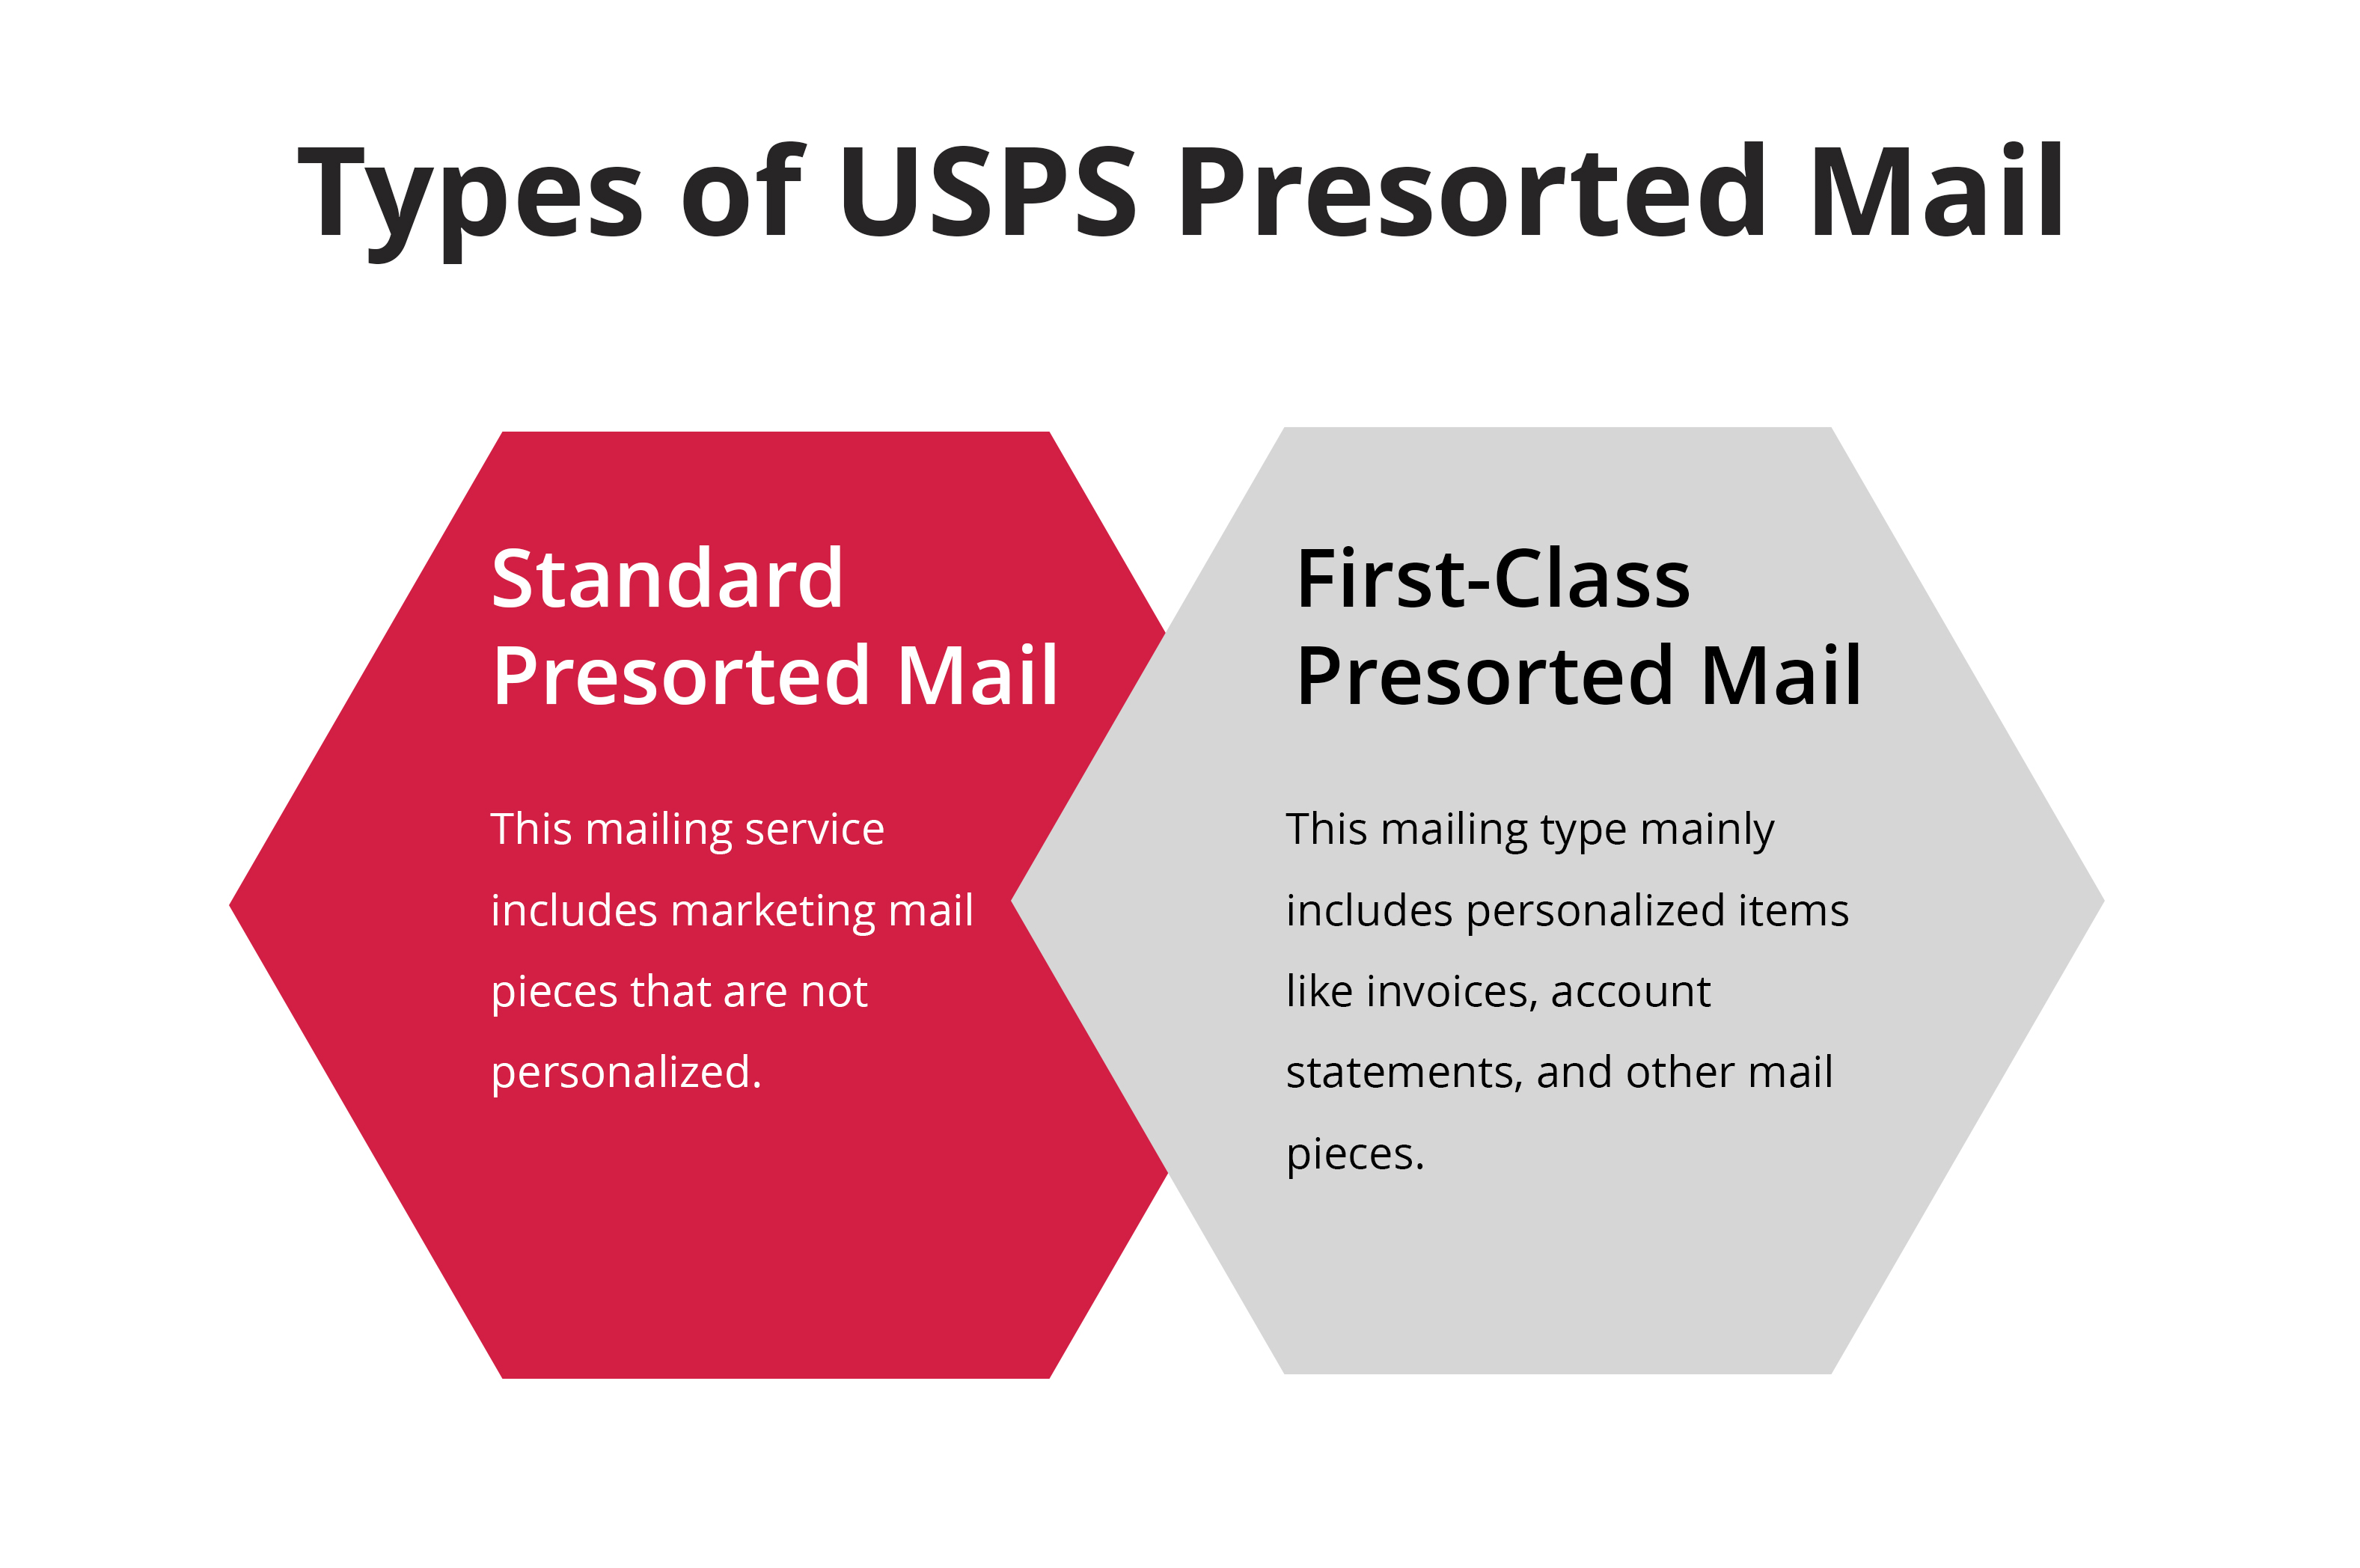 Types of USPS Presorted Mail